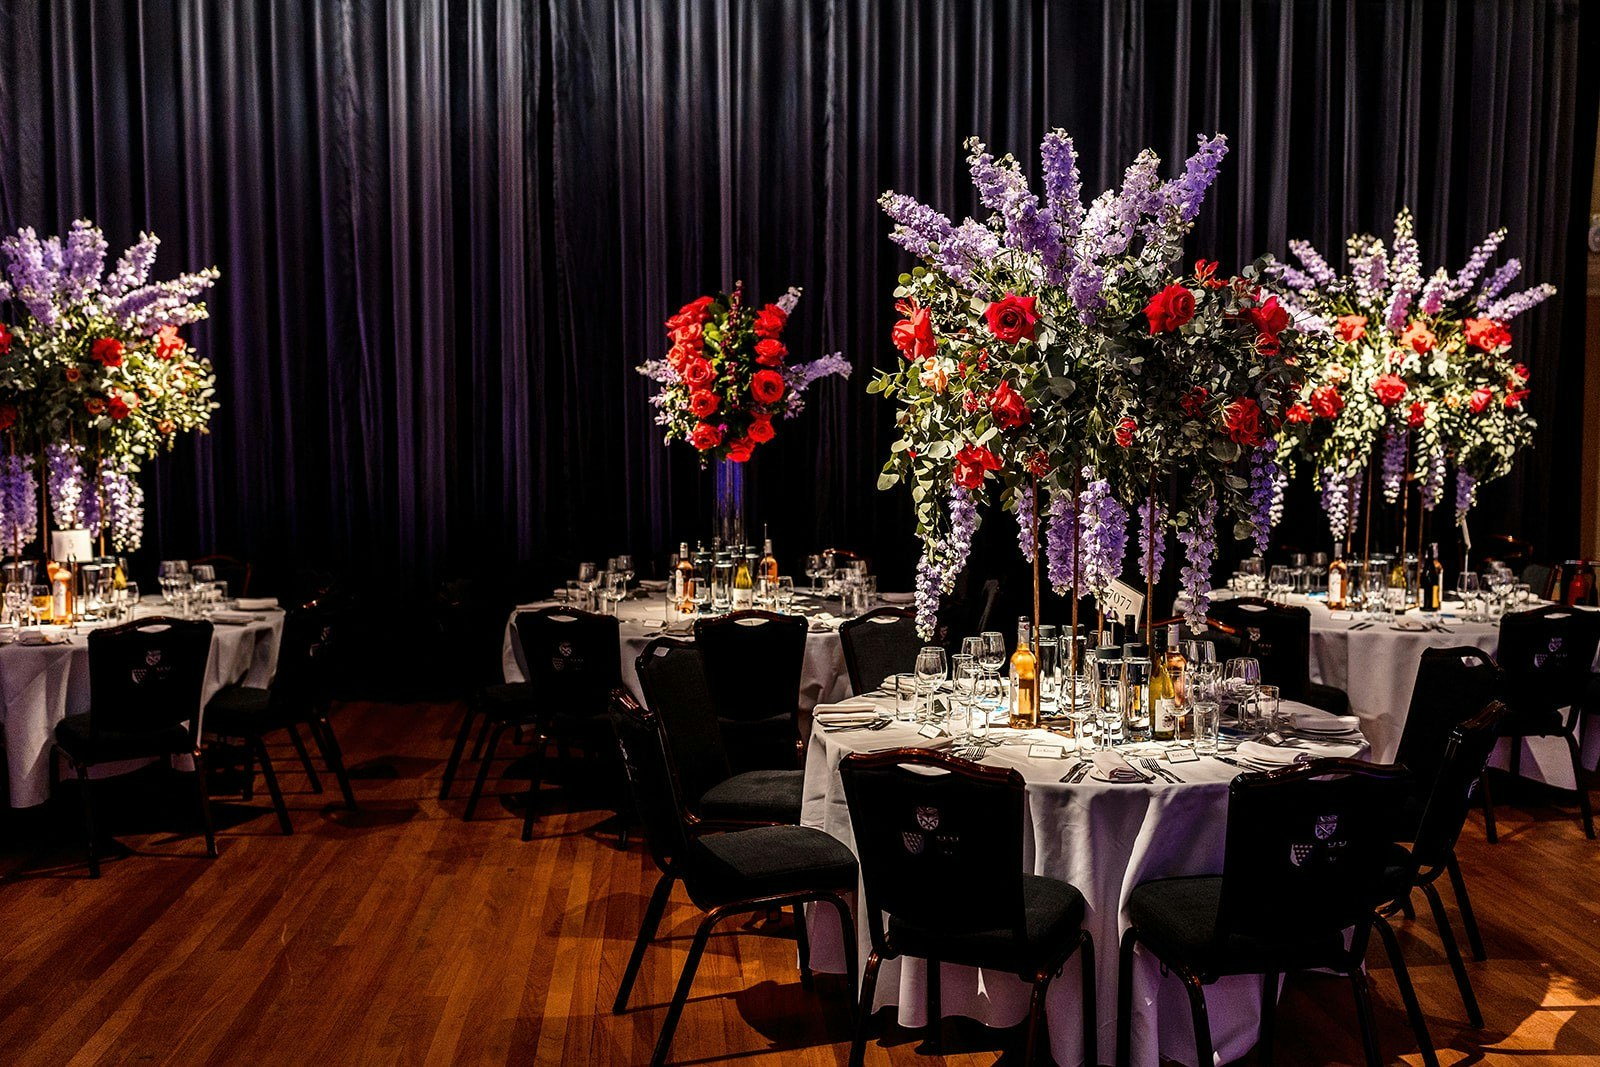 Glaziers Hall - Exclusive Hire For Weddings At Glaziers Hall  image 5